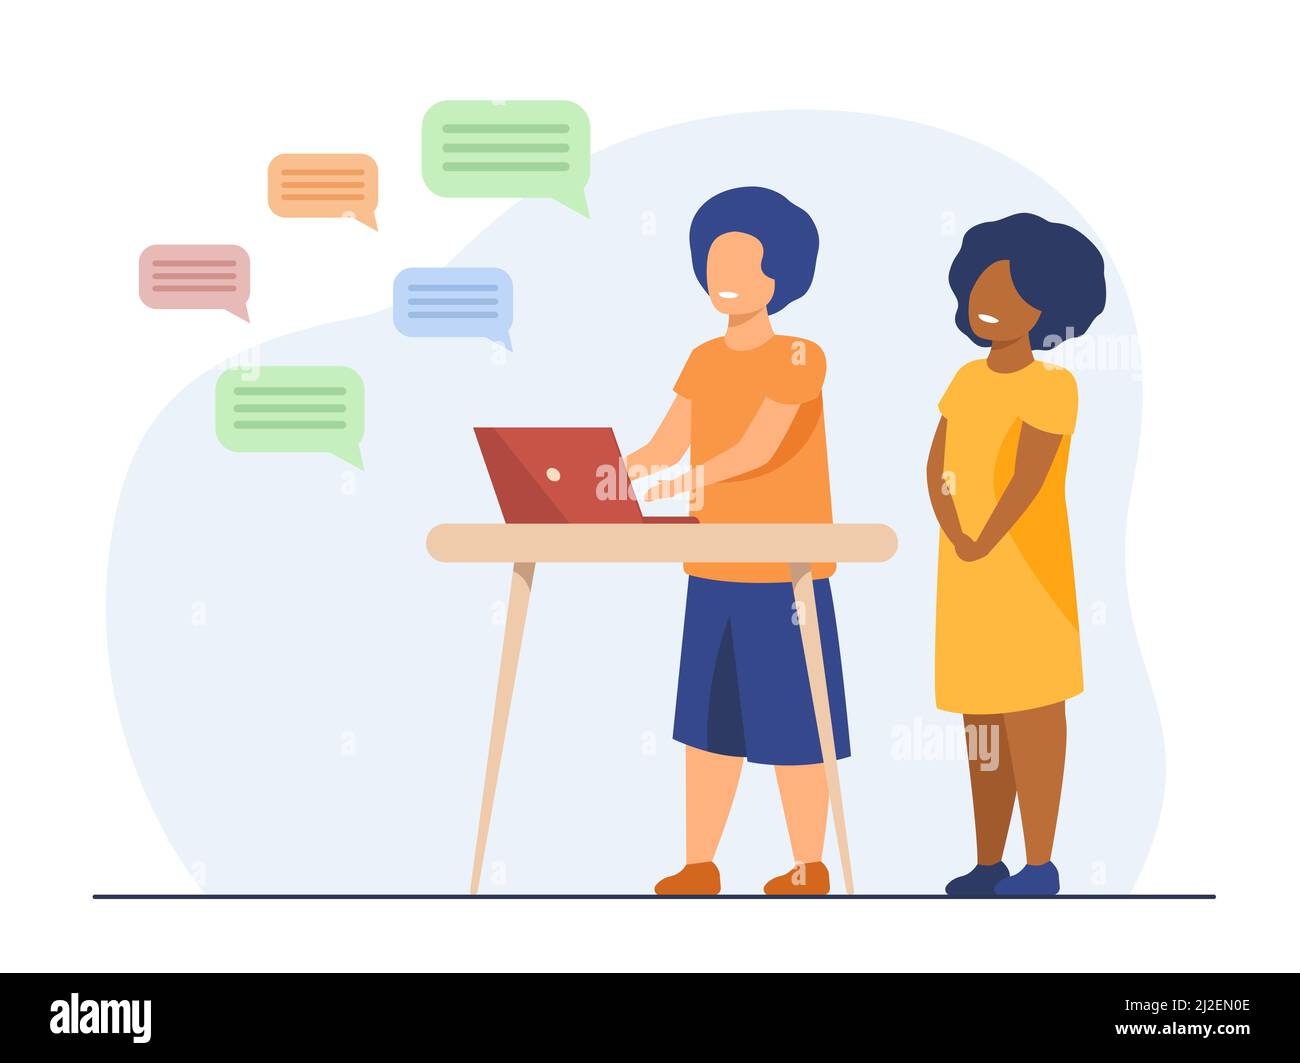 Kids chatting online. Diverse couple of children using computer, texting messages. Flat vector illustration. Communication, childhood concept for bann Stock Vector